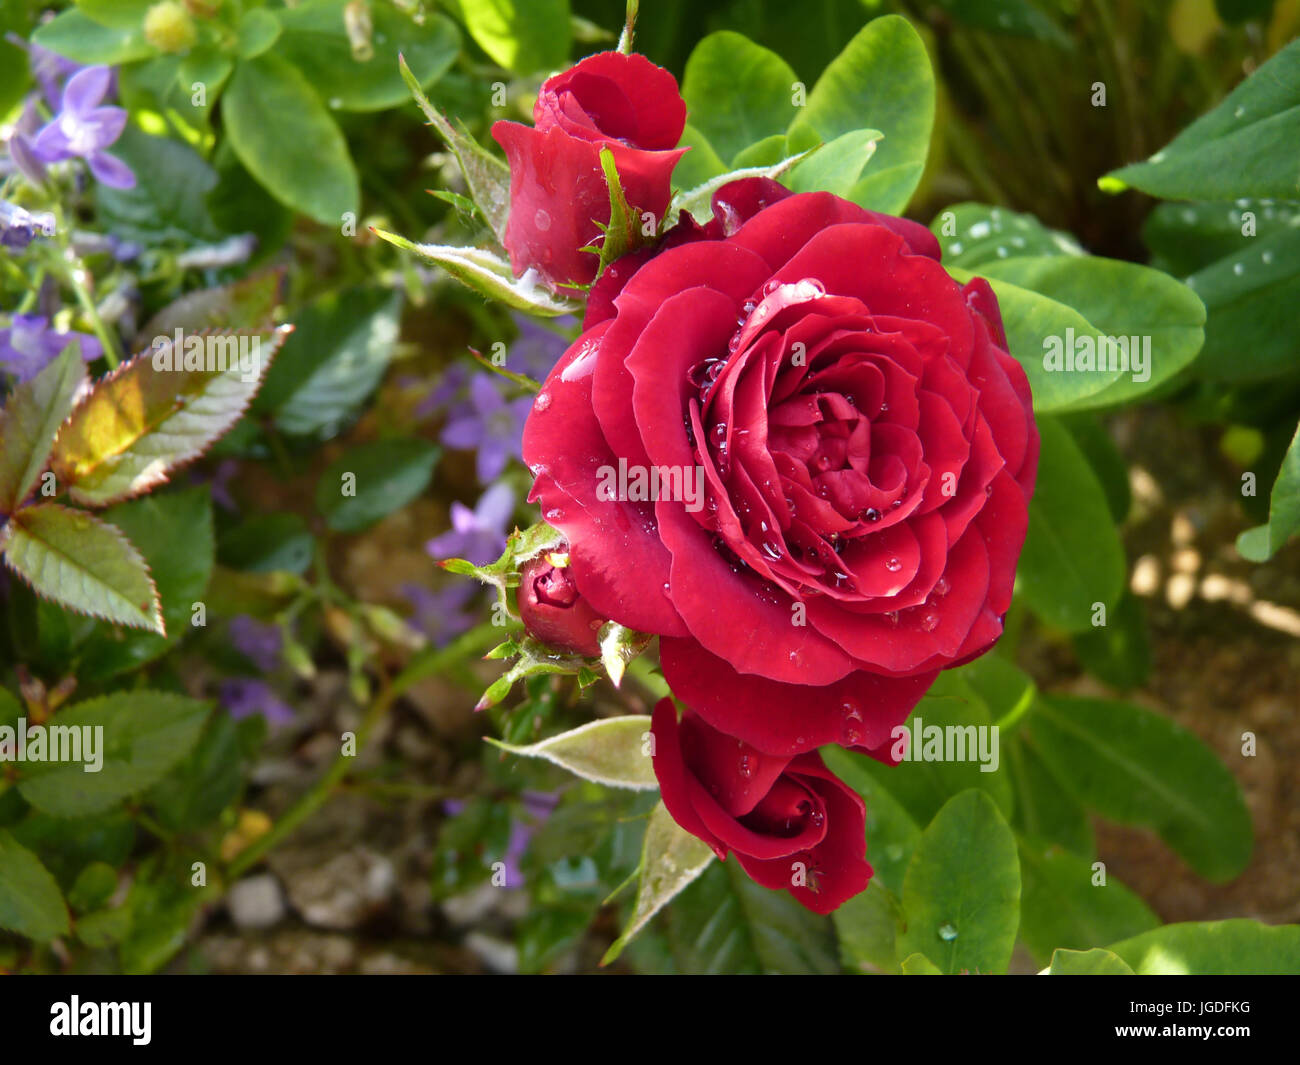 Red rose flower in full bloom in garden or park covered by water drops Stock Photo